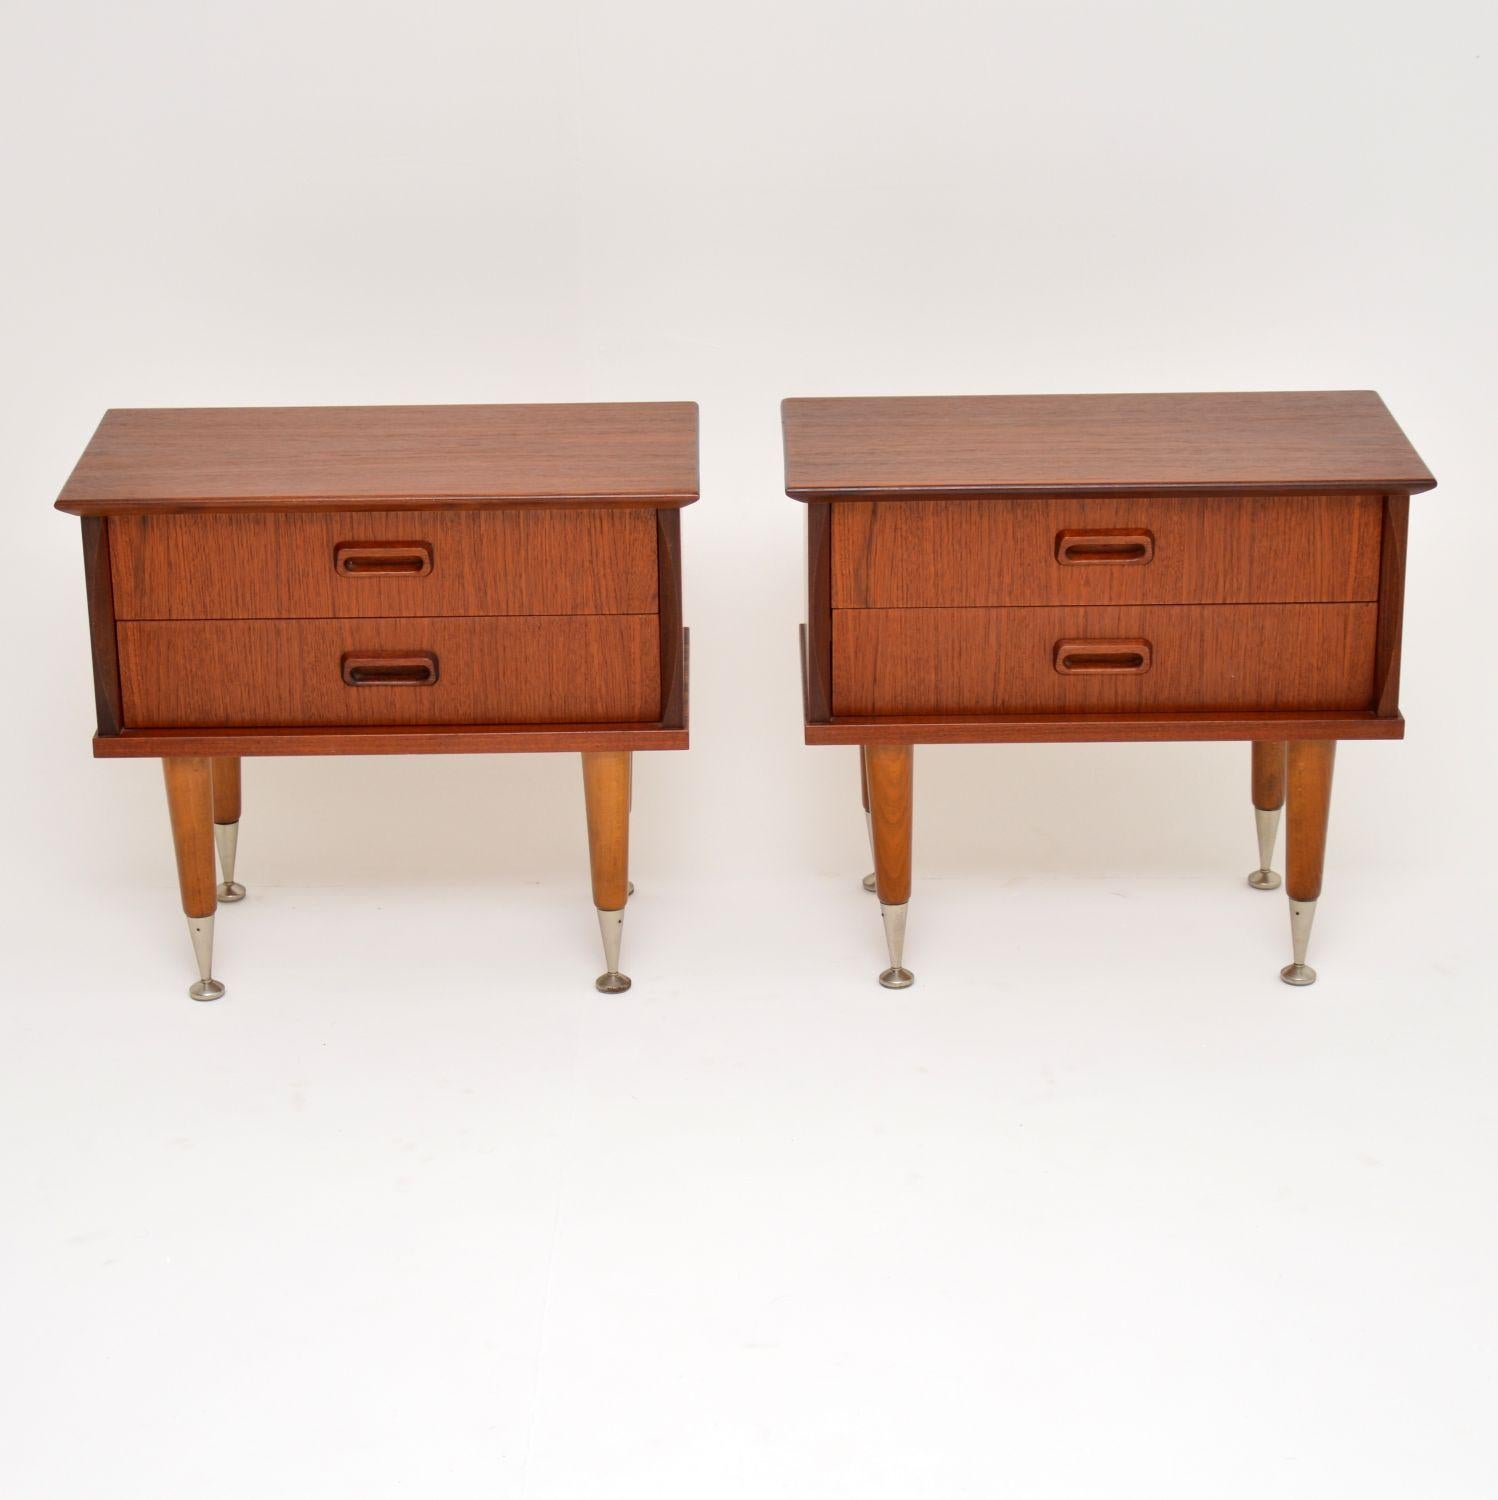 A very smart and useful pair of vintage bedside chests in teak, these were made in Denmark, circa 1960s. The condition overall is great, these are clean and have very little wear to be seen.

Measures: Width 55 cm, 22 inches
Depth 30 cm, 12